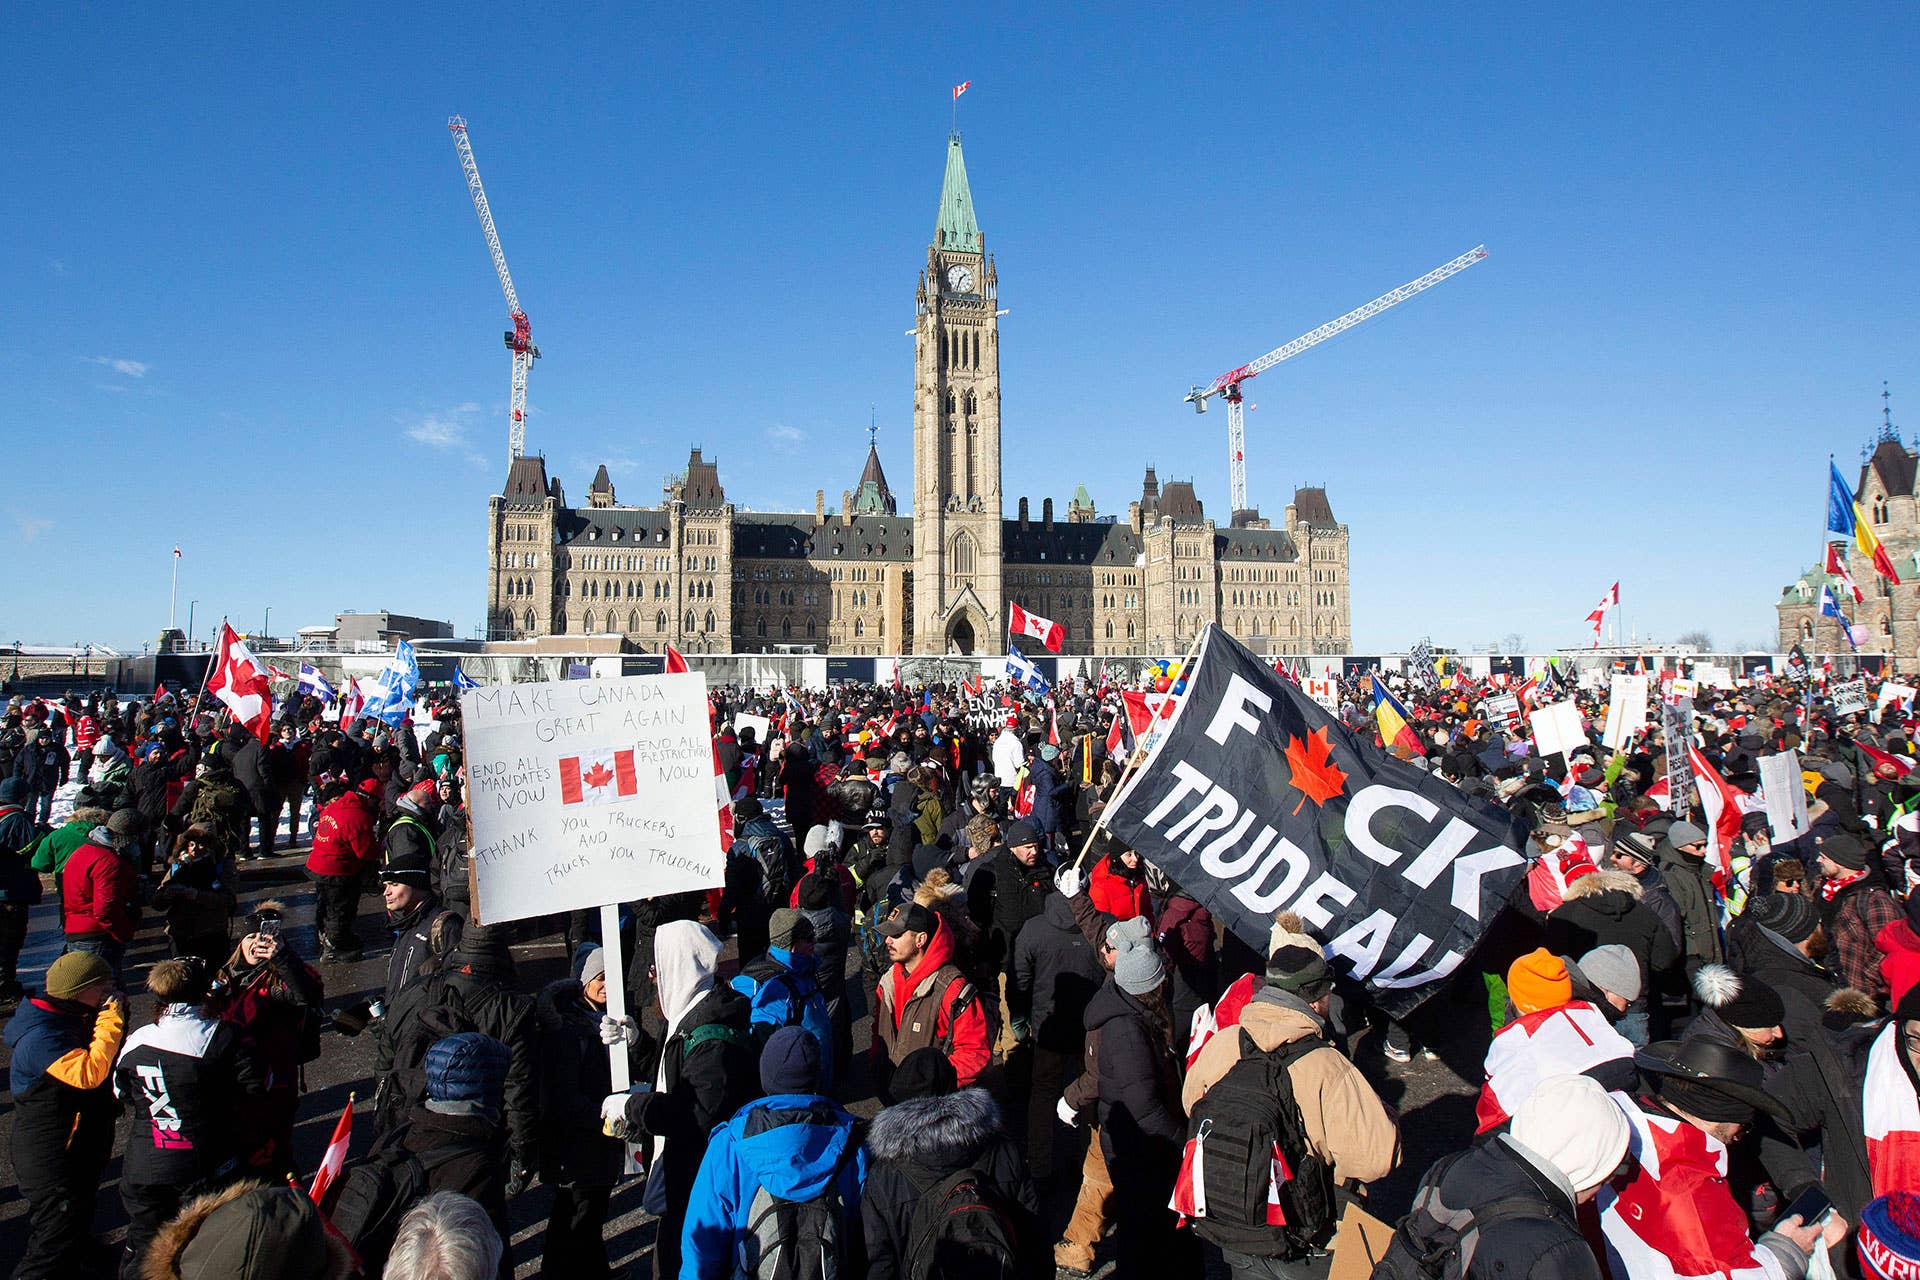 Scenes from Canada's 'Freedom Convoy' on Parliament Hill